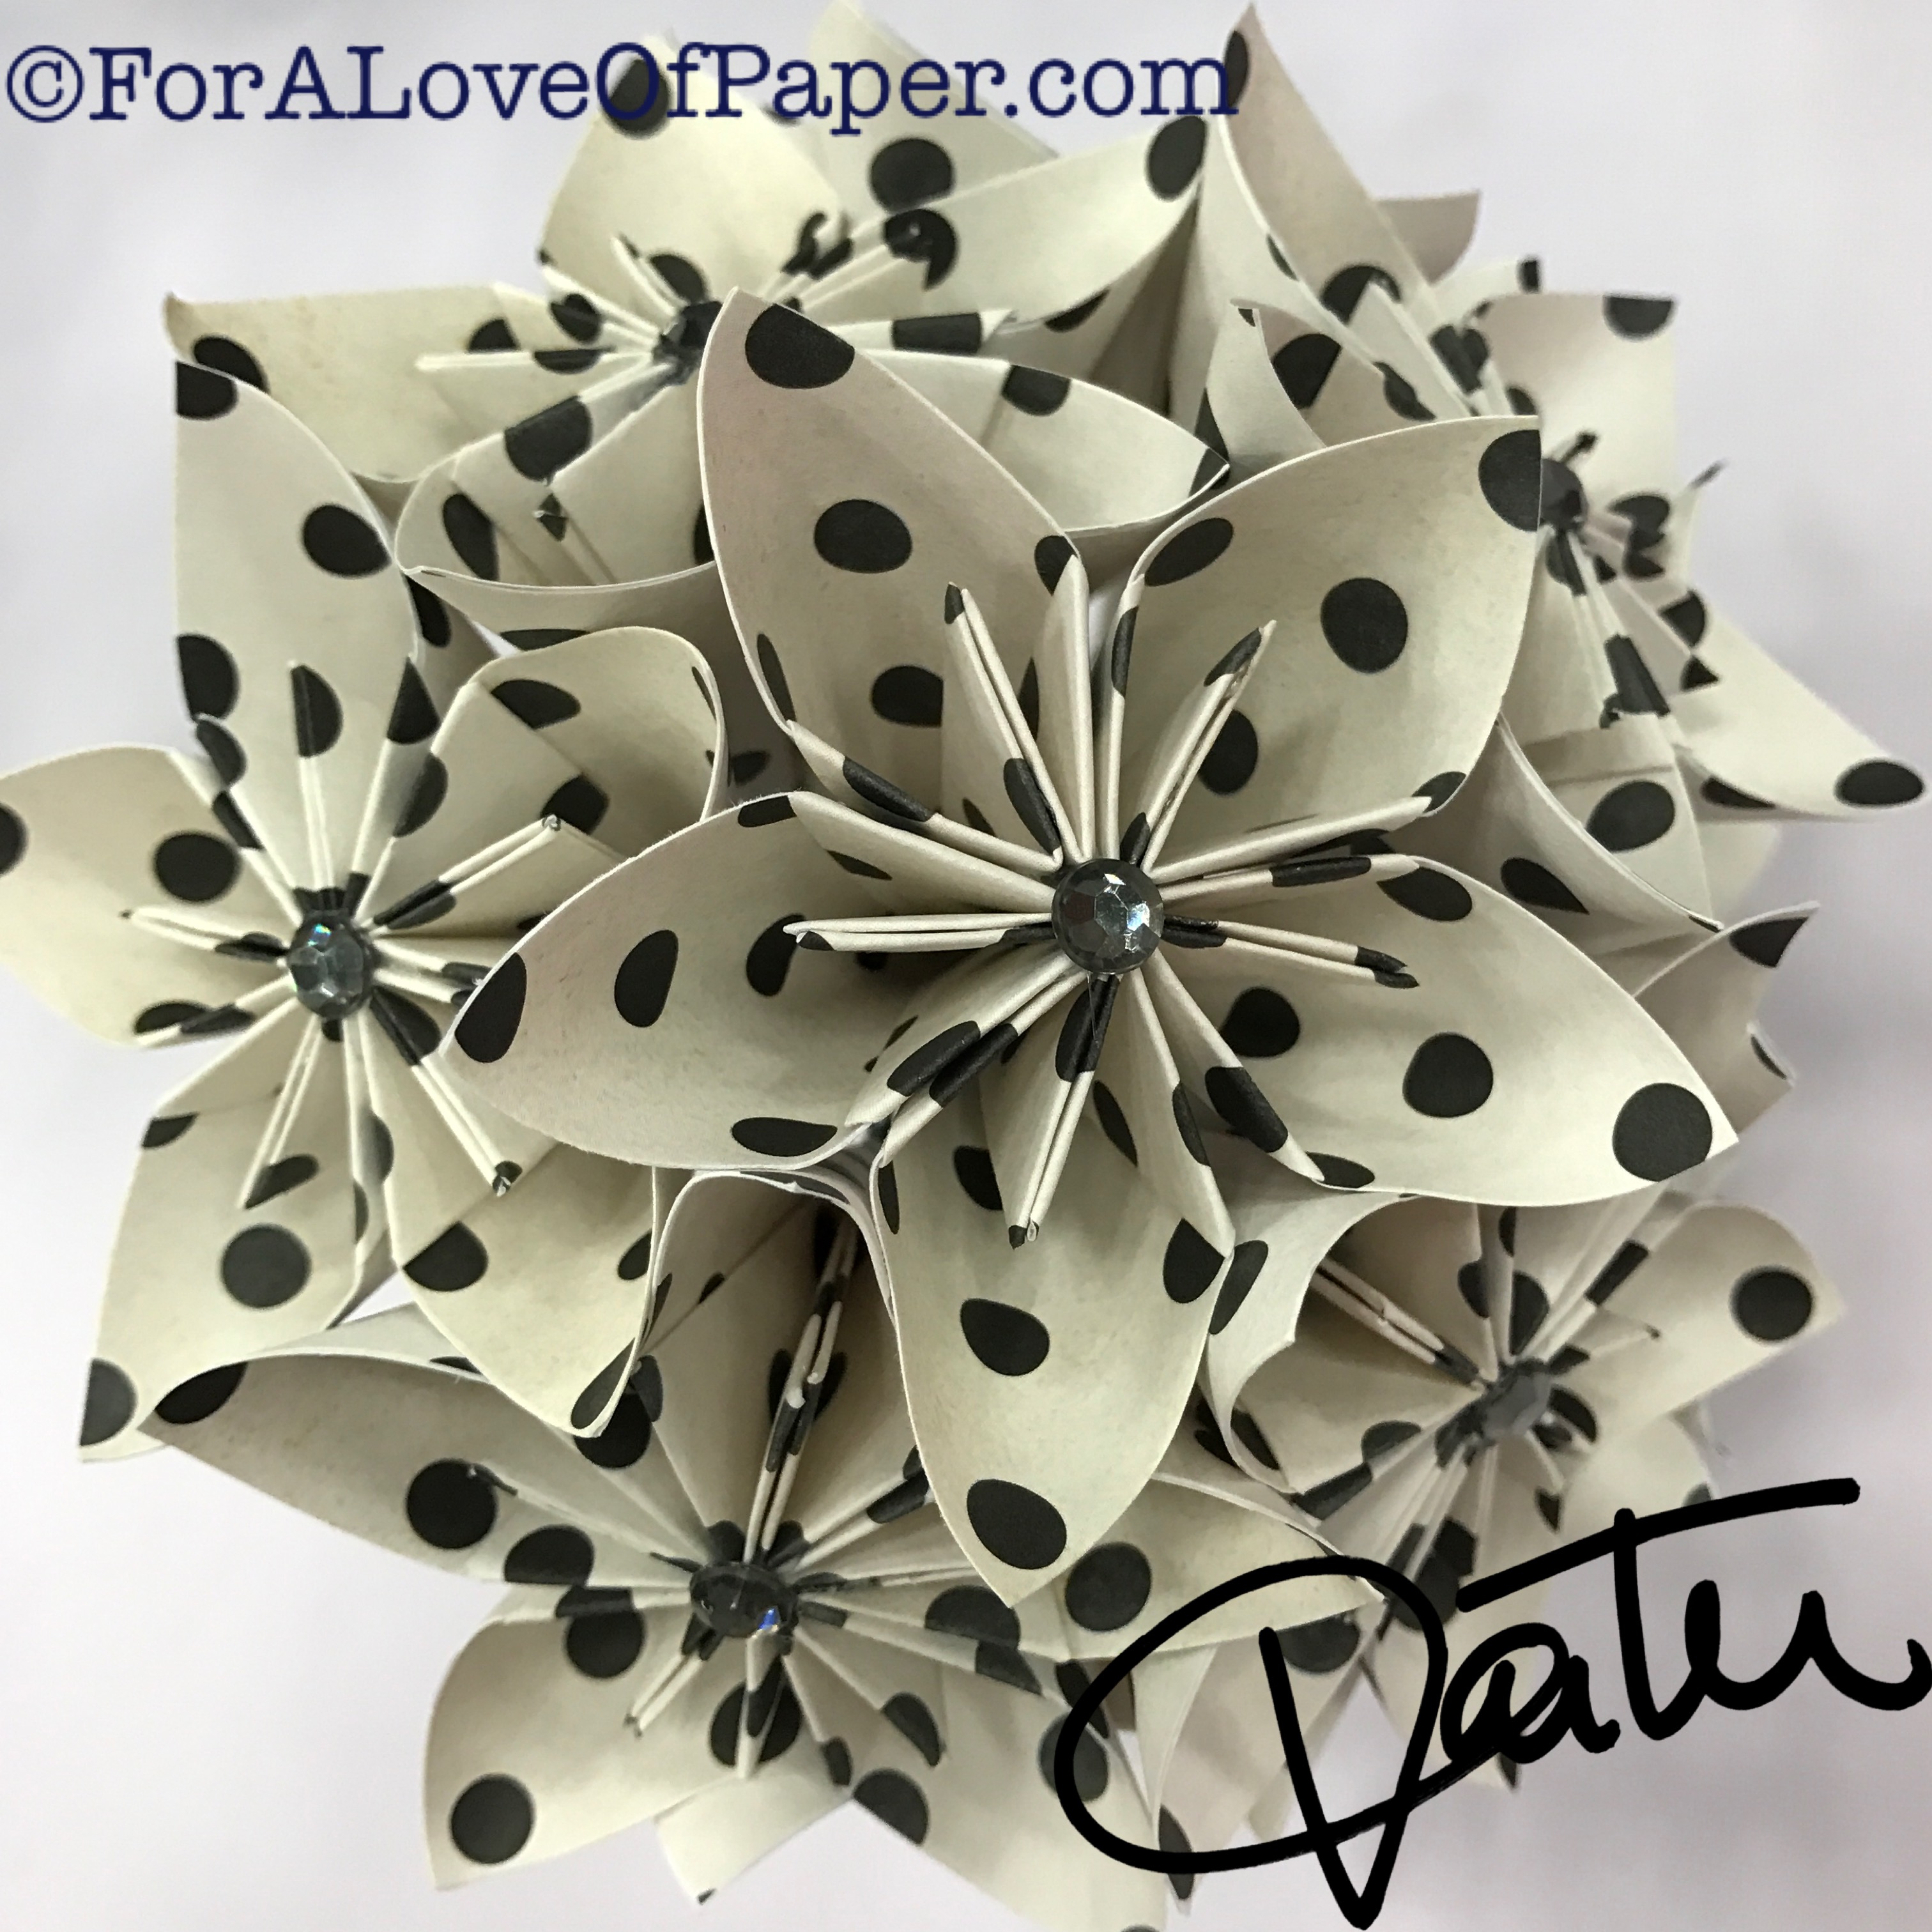 Paper flowers in classic dot themed scrapbook paper